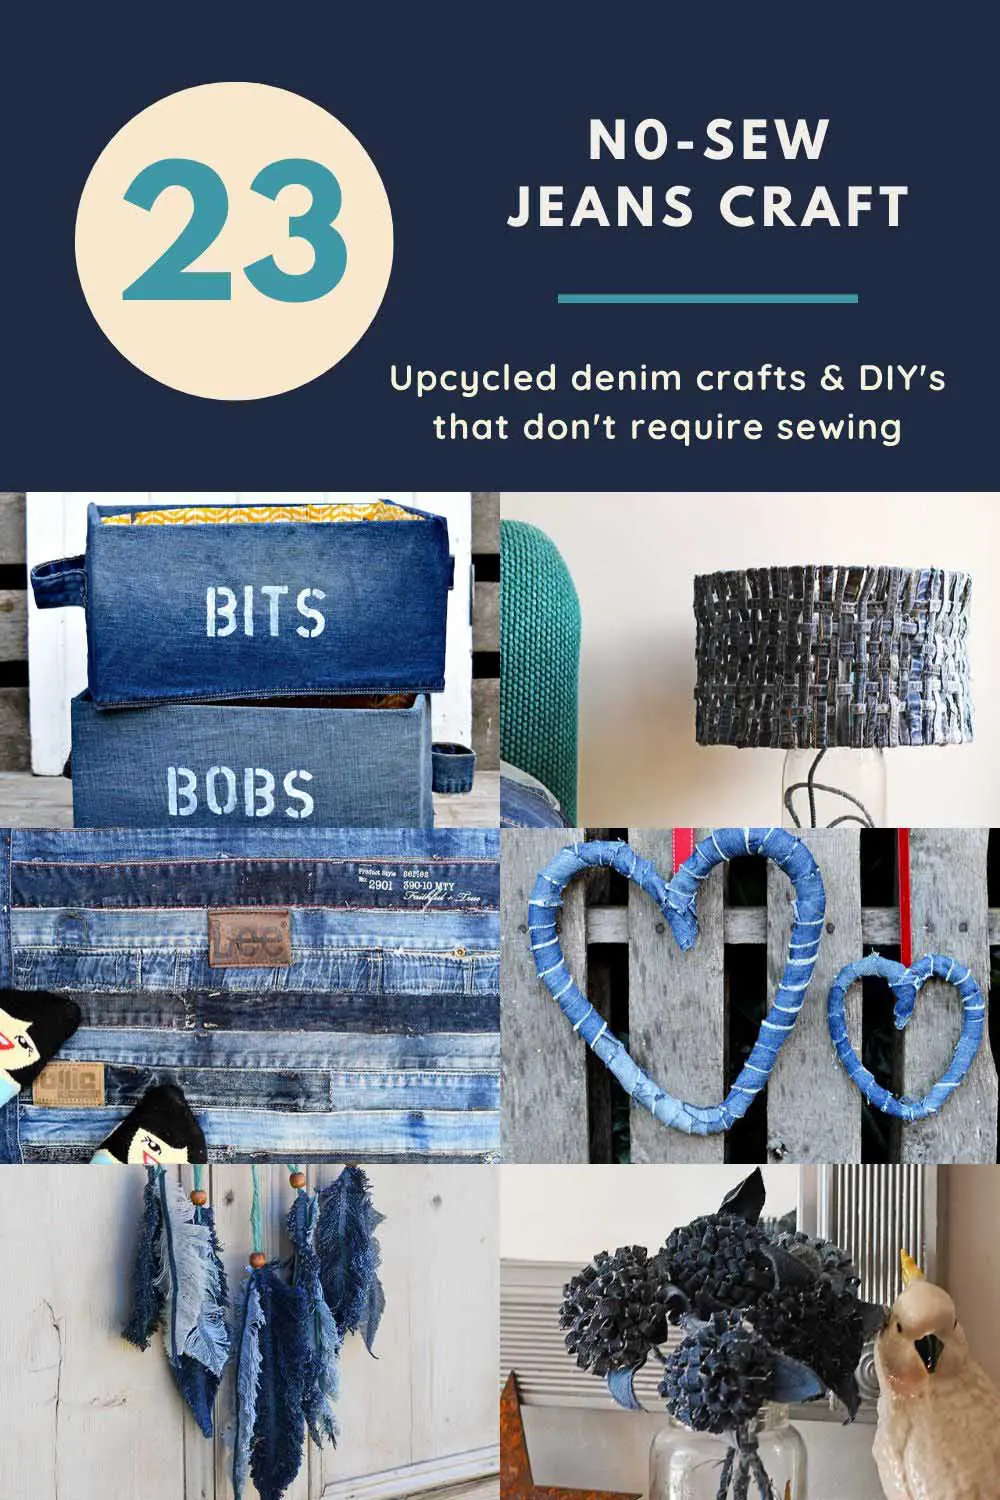 20 No-Sew ways to Upcycle Old Jeans! - Upcycle My Stuff